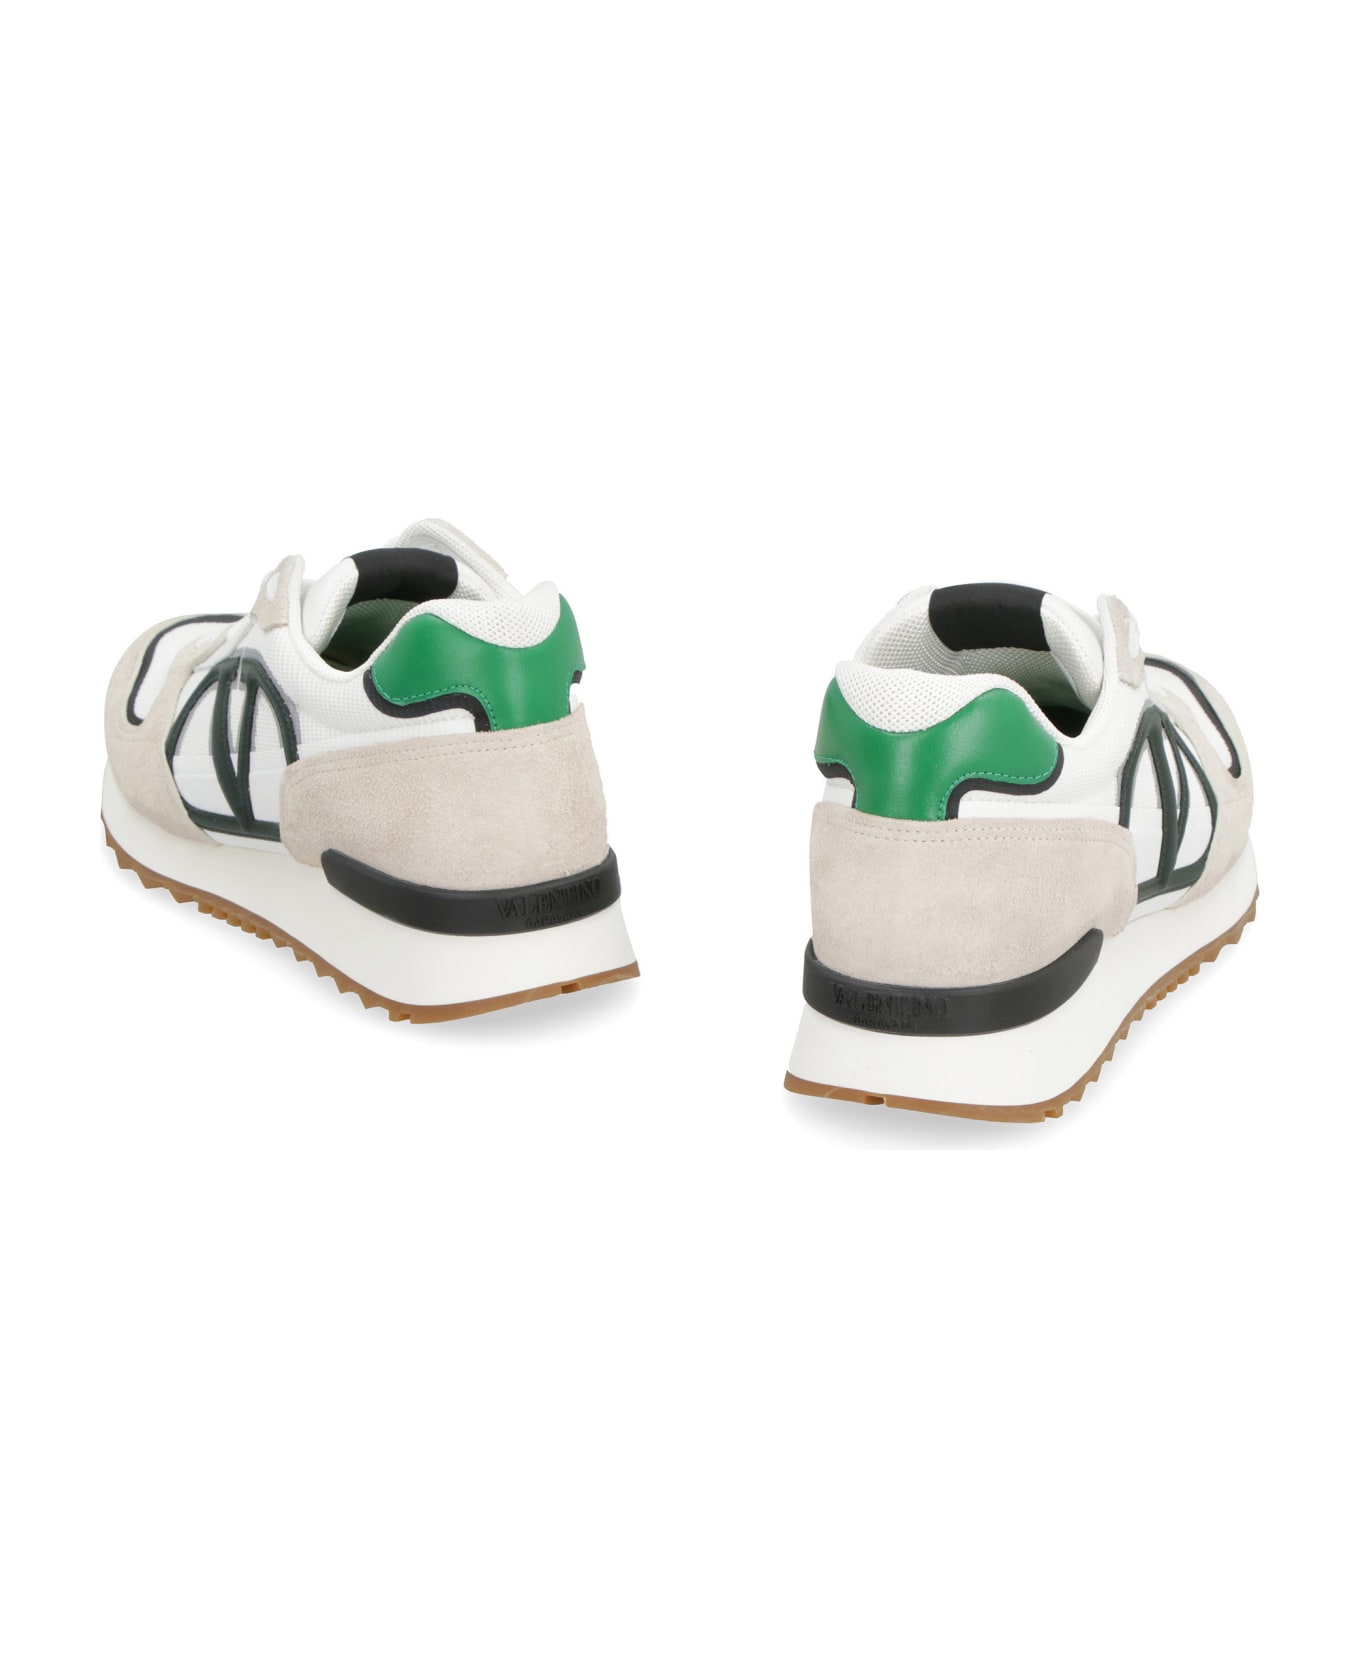 Valentino Garavani - Vlogo Pace Leather And Fabric Low-top Sneakers - White